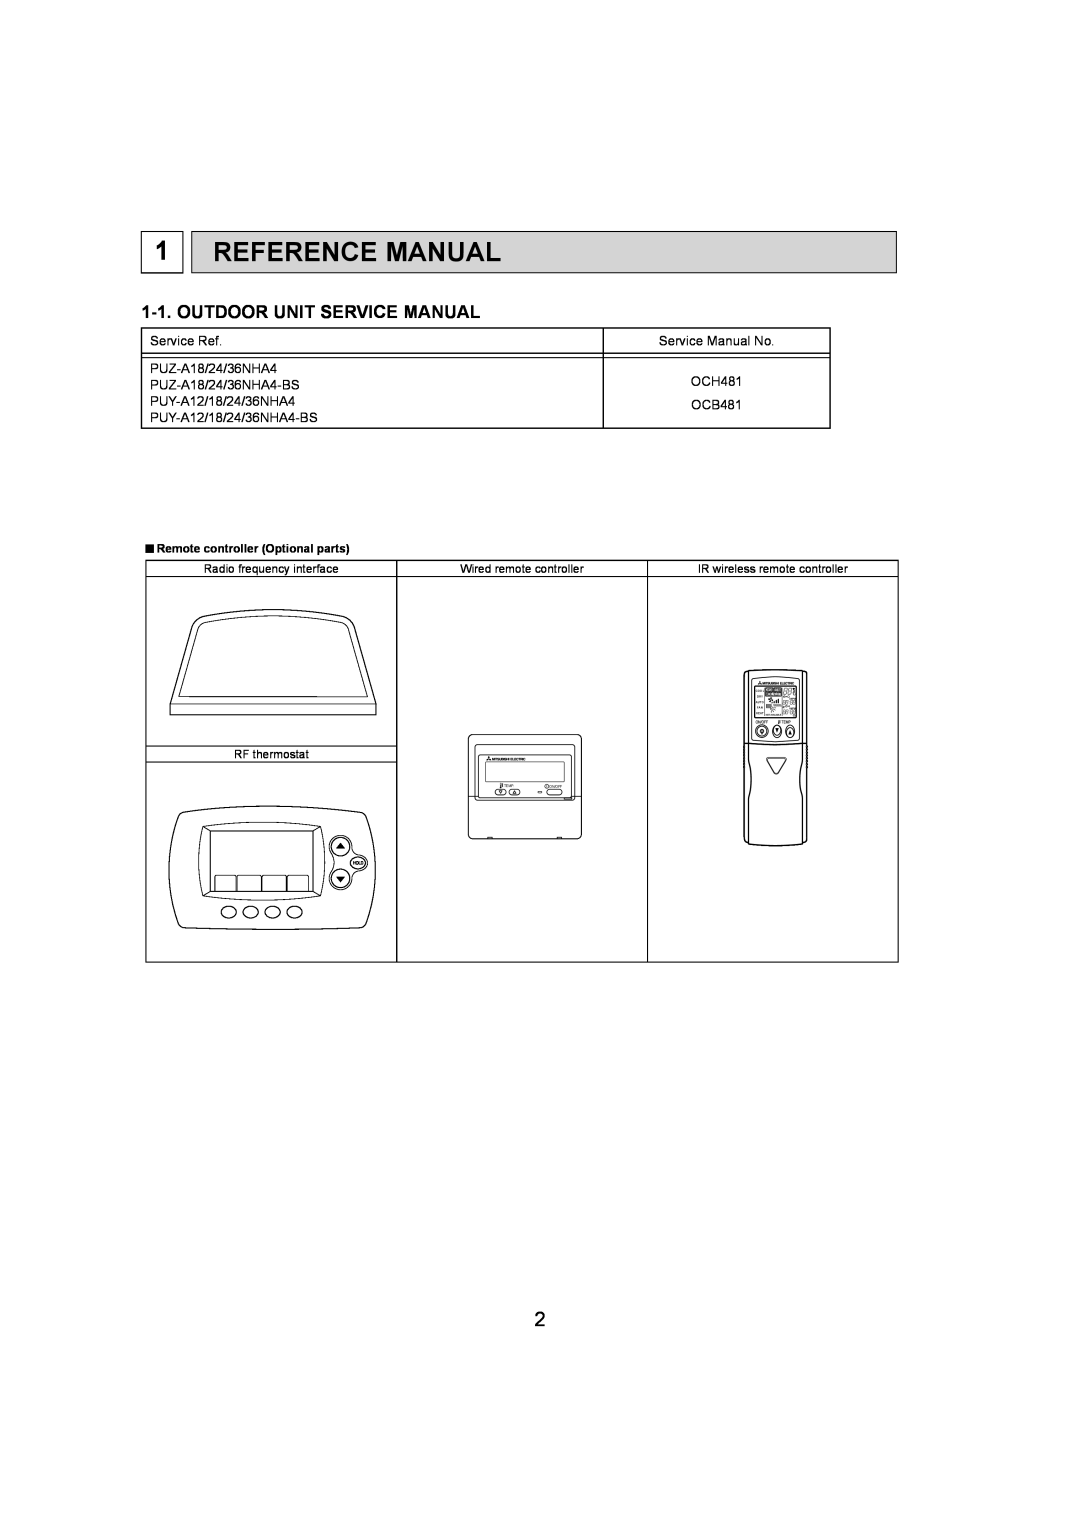 Mitsumi electronic PKA-A12HA4 Reference Manual, Remote controller Optional parts, Radio frequency interface, Cool, Auto 